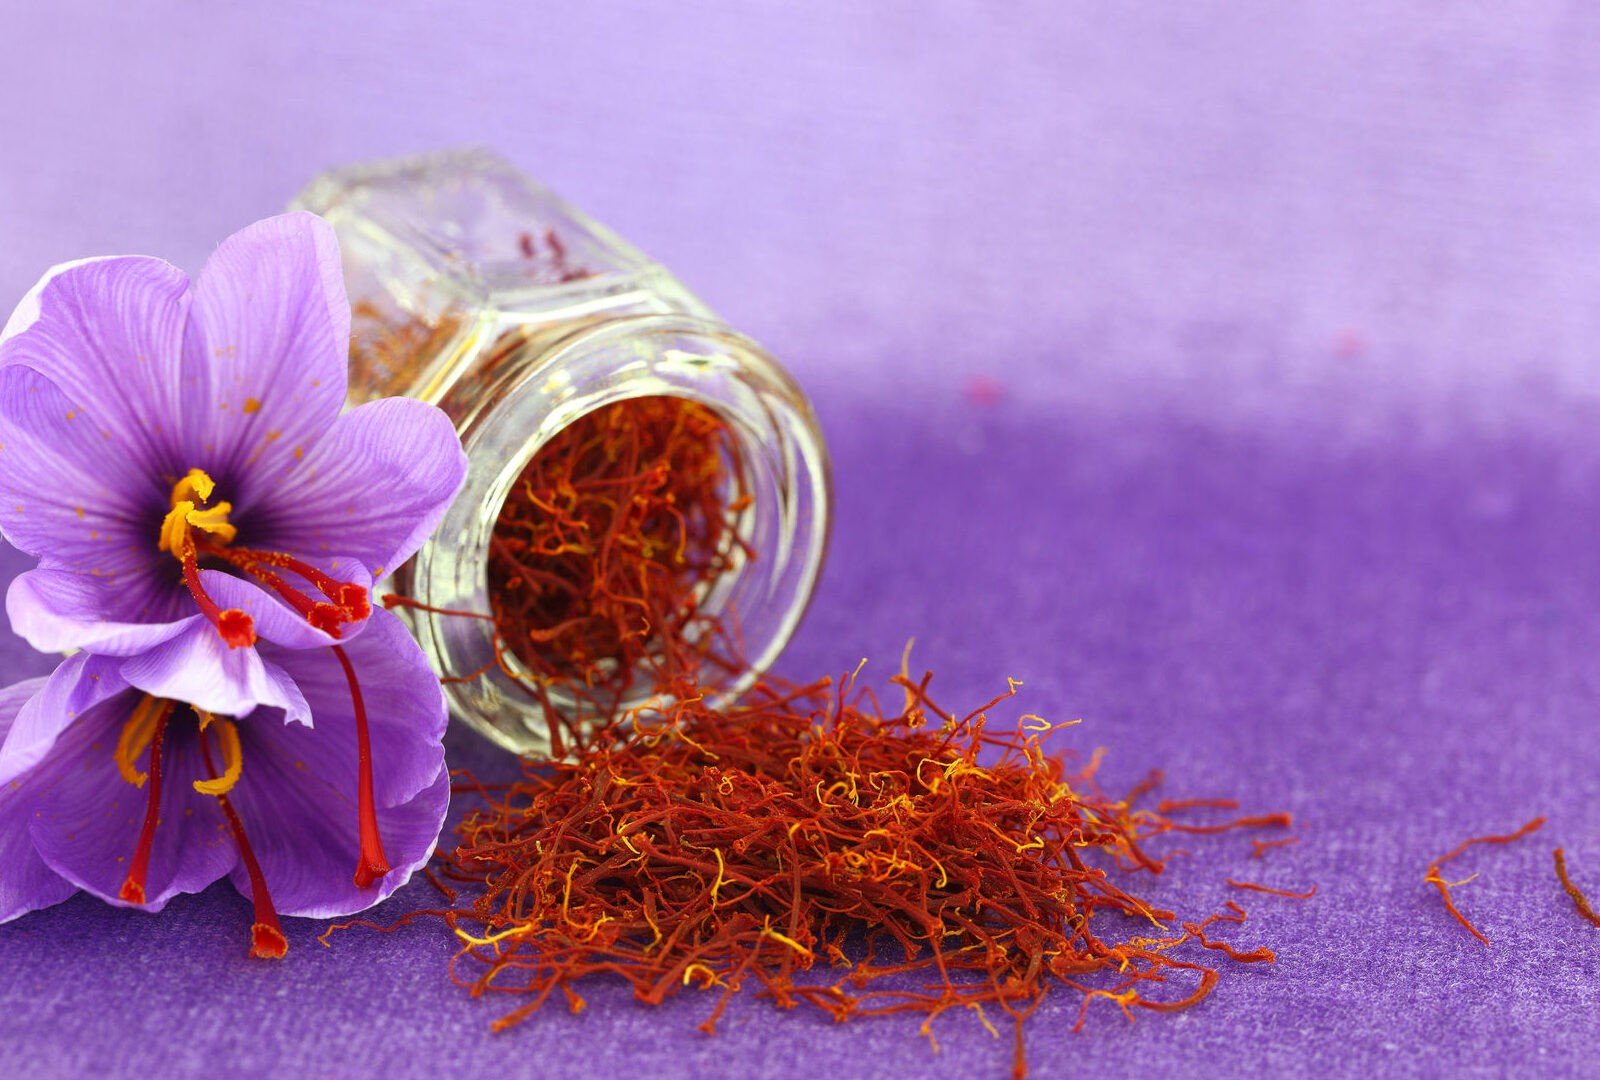 Saffron- A Spicy Treatment for Depression, Alzheimer’s, Macular Degeneration, Weight Loss and More